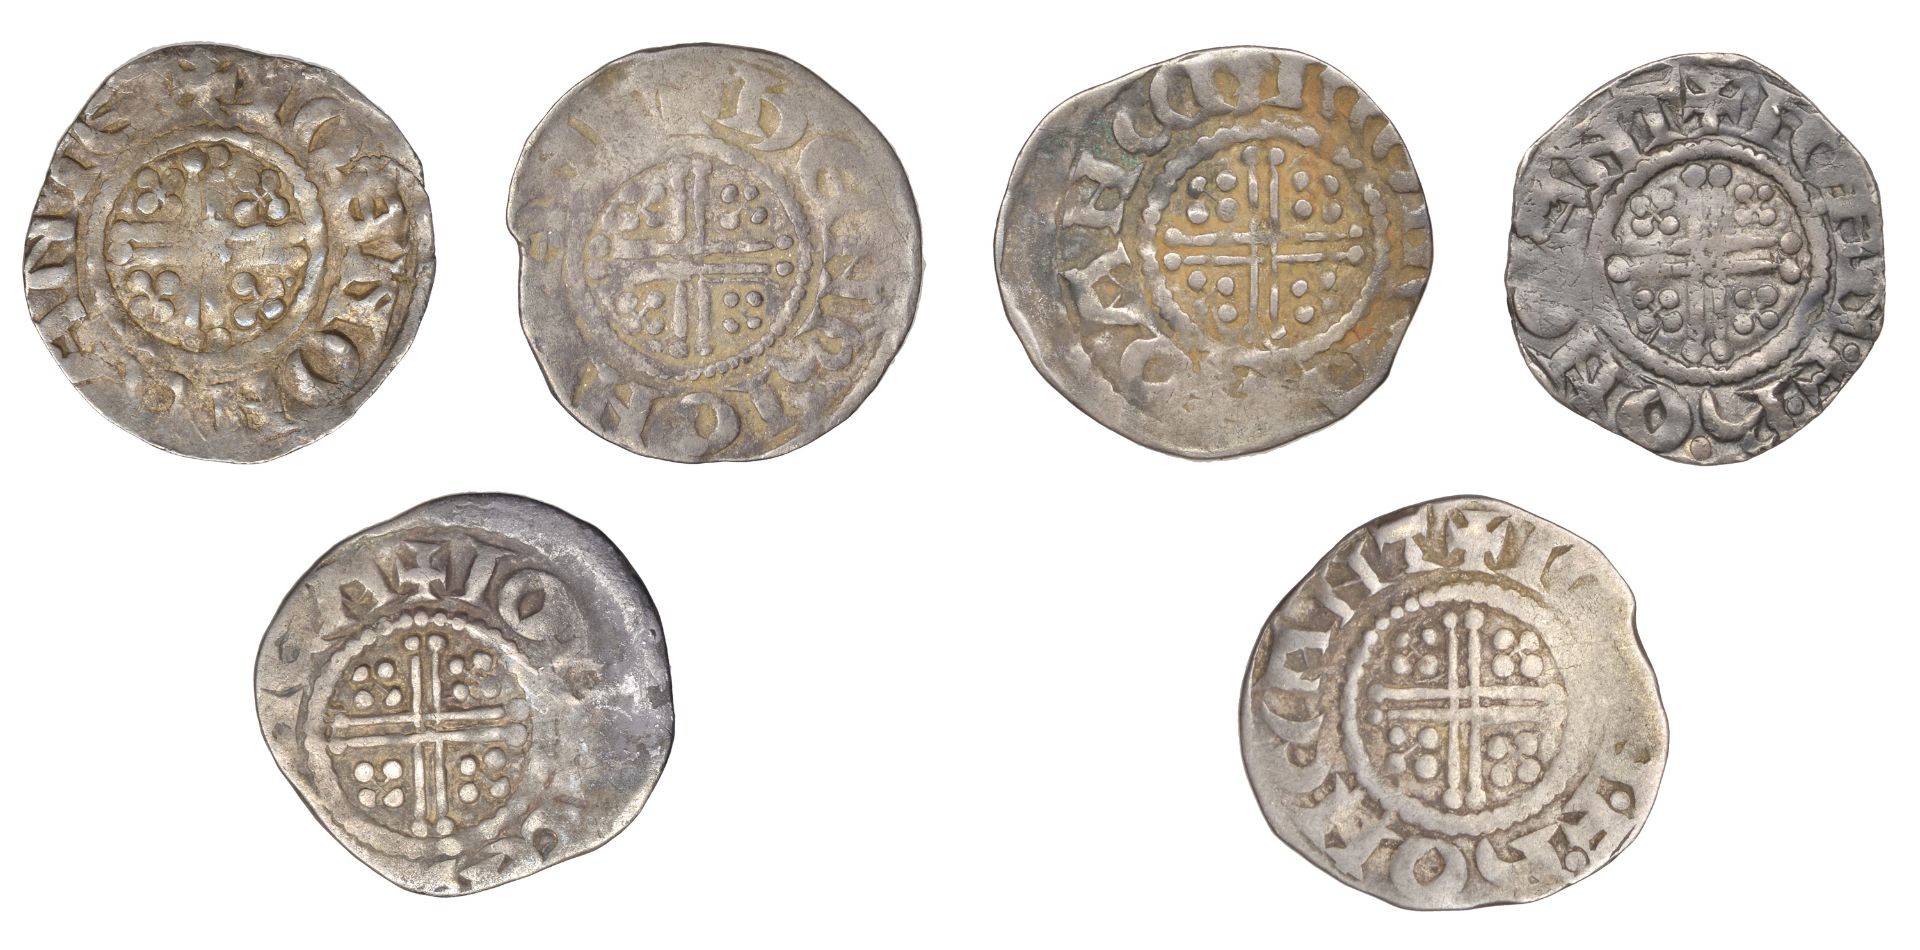 Henry III (1216-1272), Pennies (6), all Canterbury, class VIIc1, Henri, henri on cant, 1.36g... - Image 2 of 2